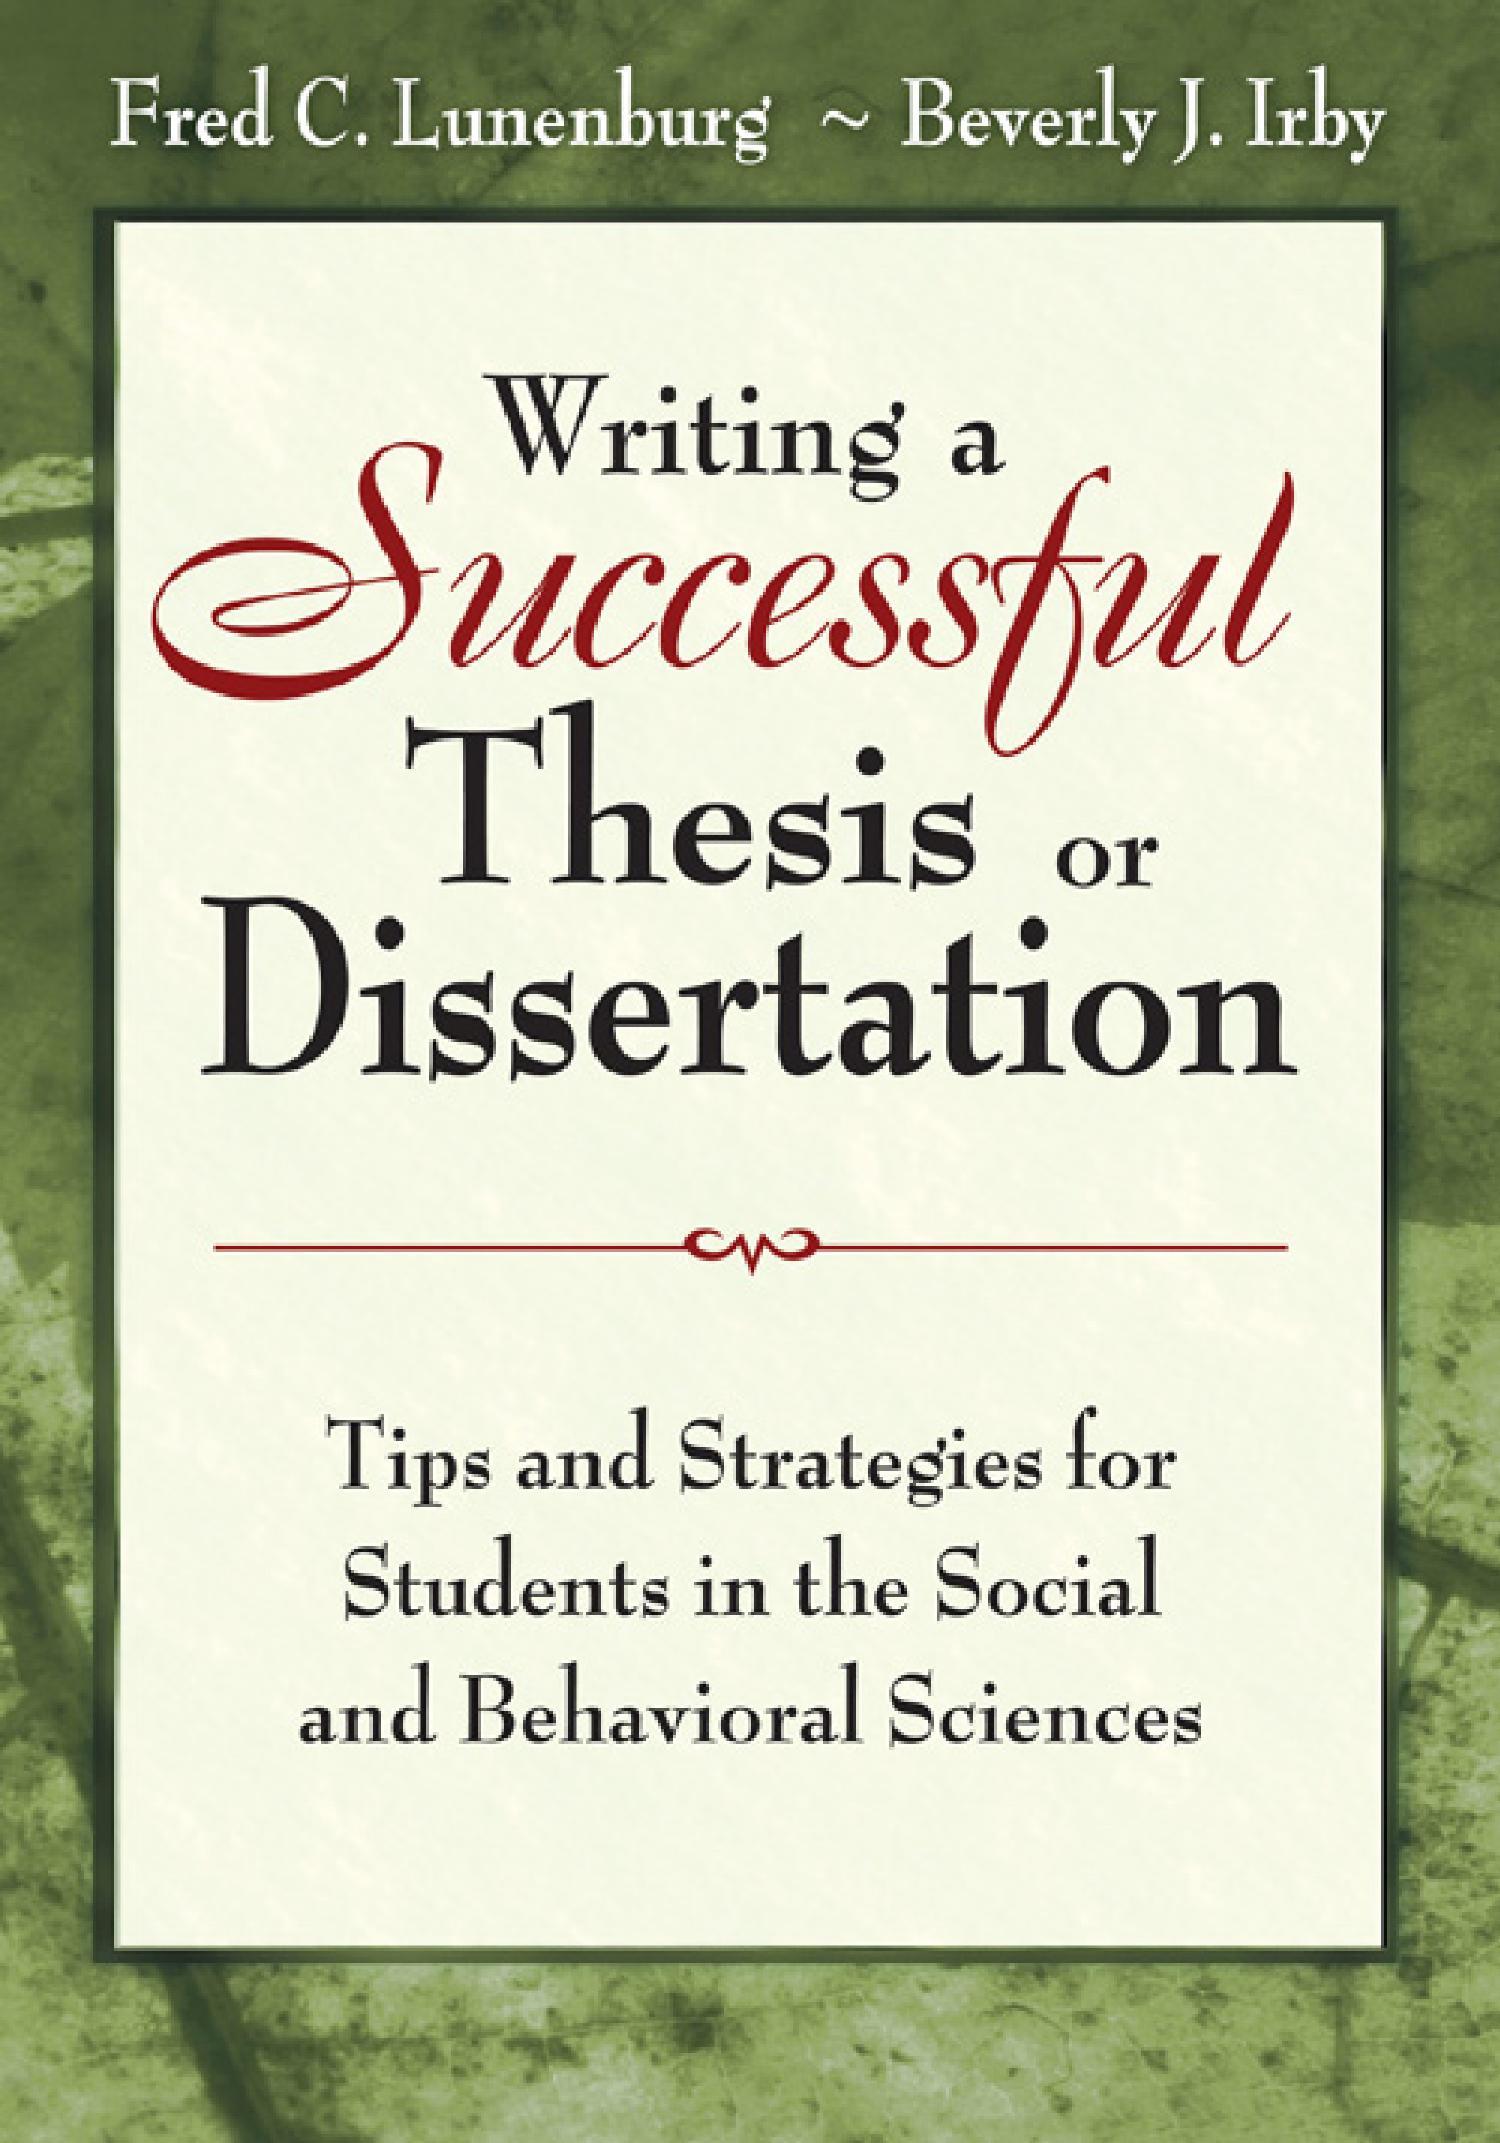 complete your thesis or dissertation successfully practical guidelines pdf